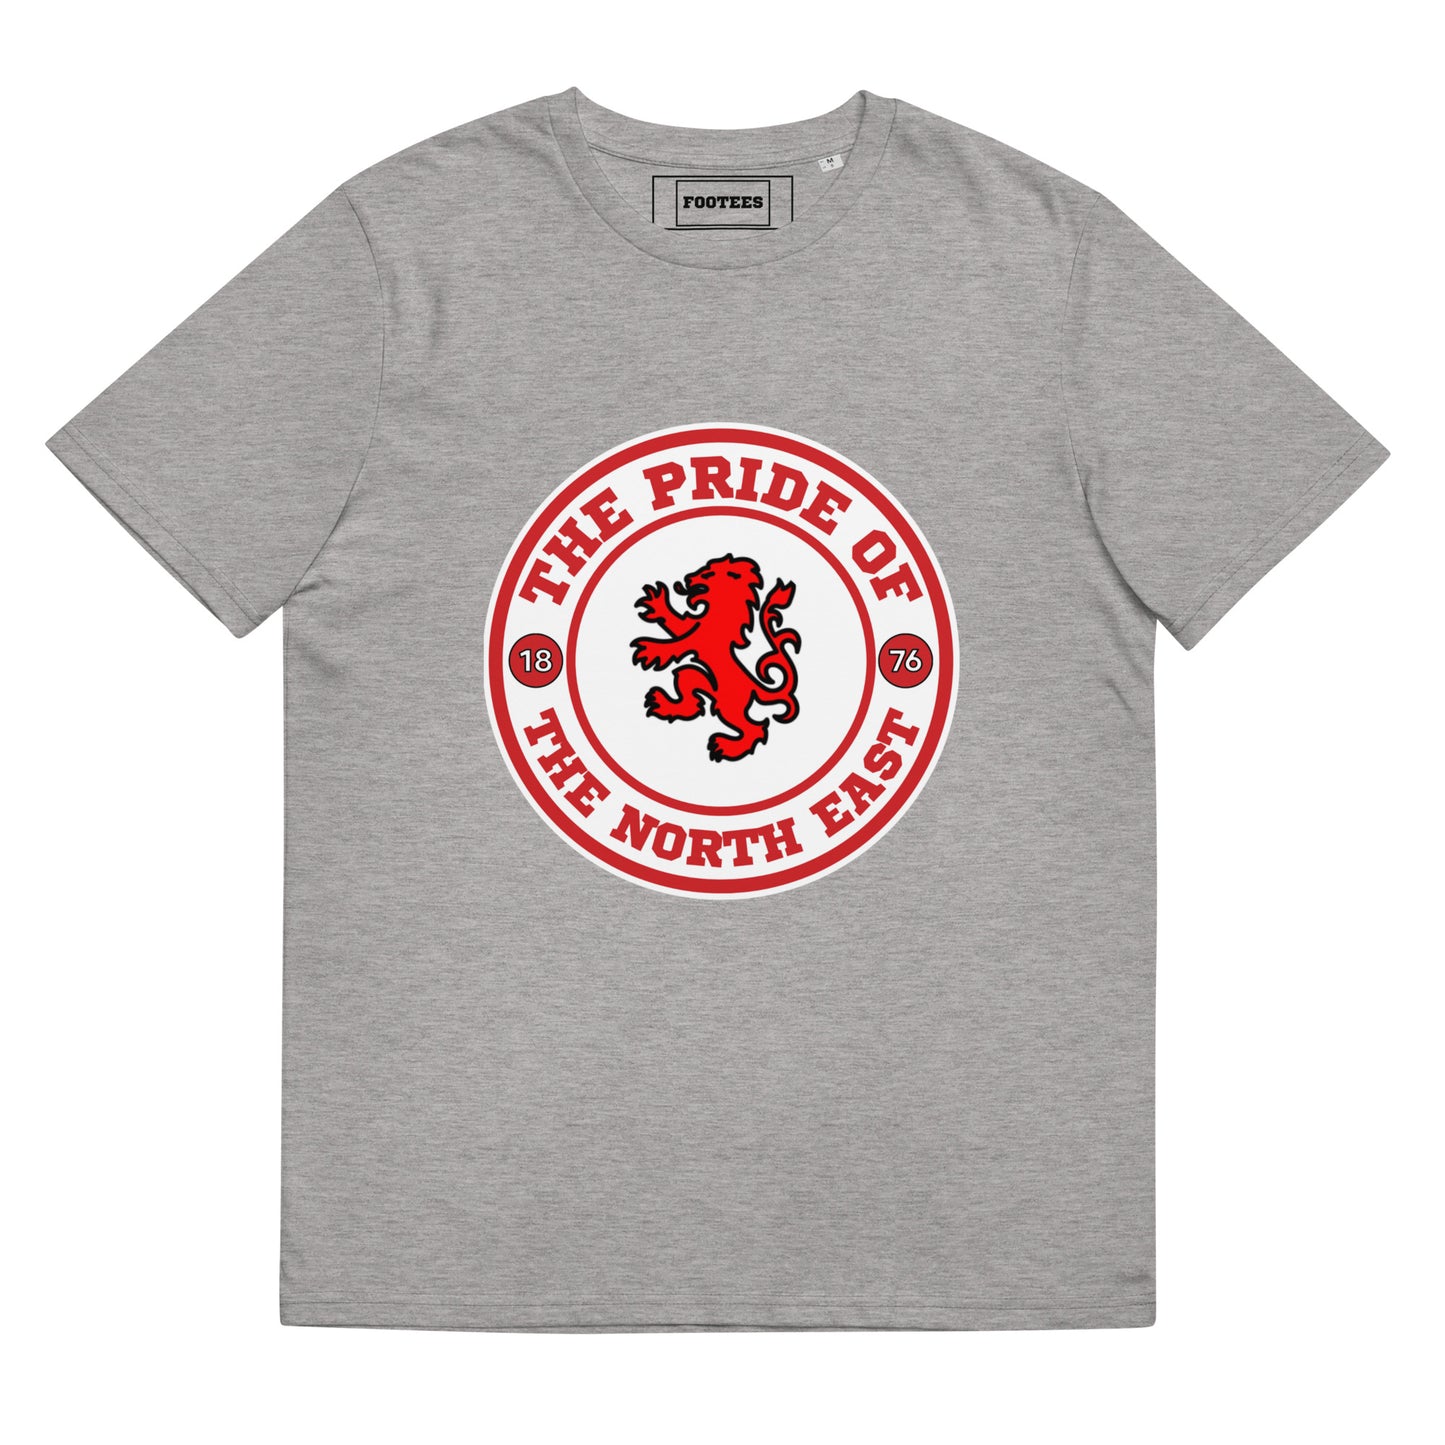 The Pride of the North East Boro Tee